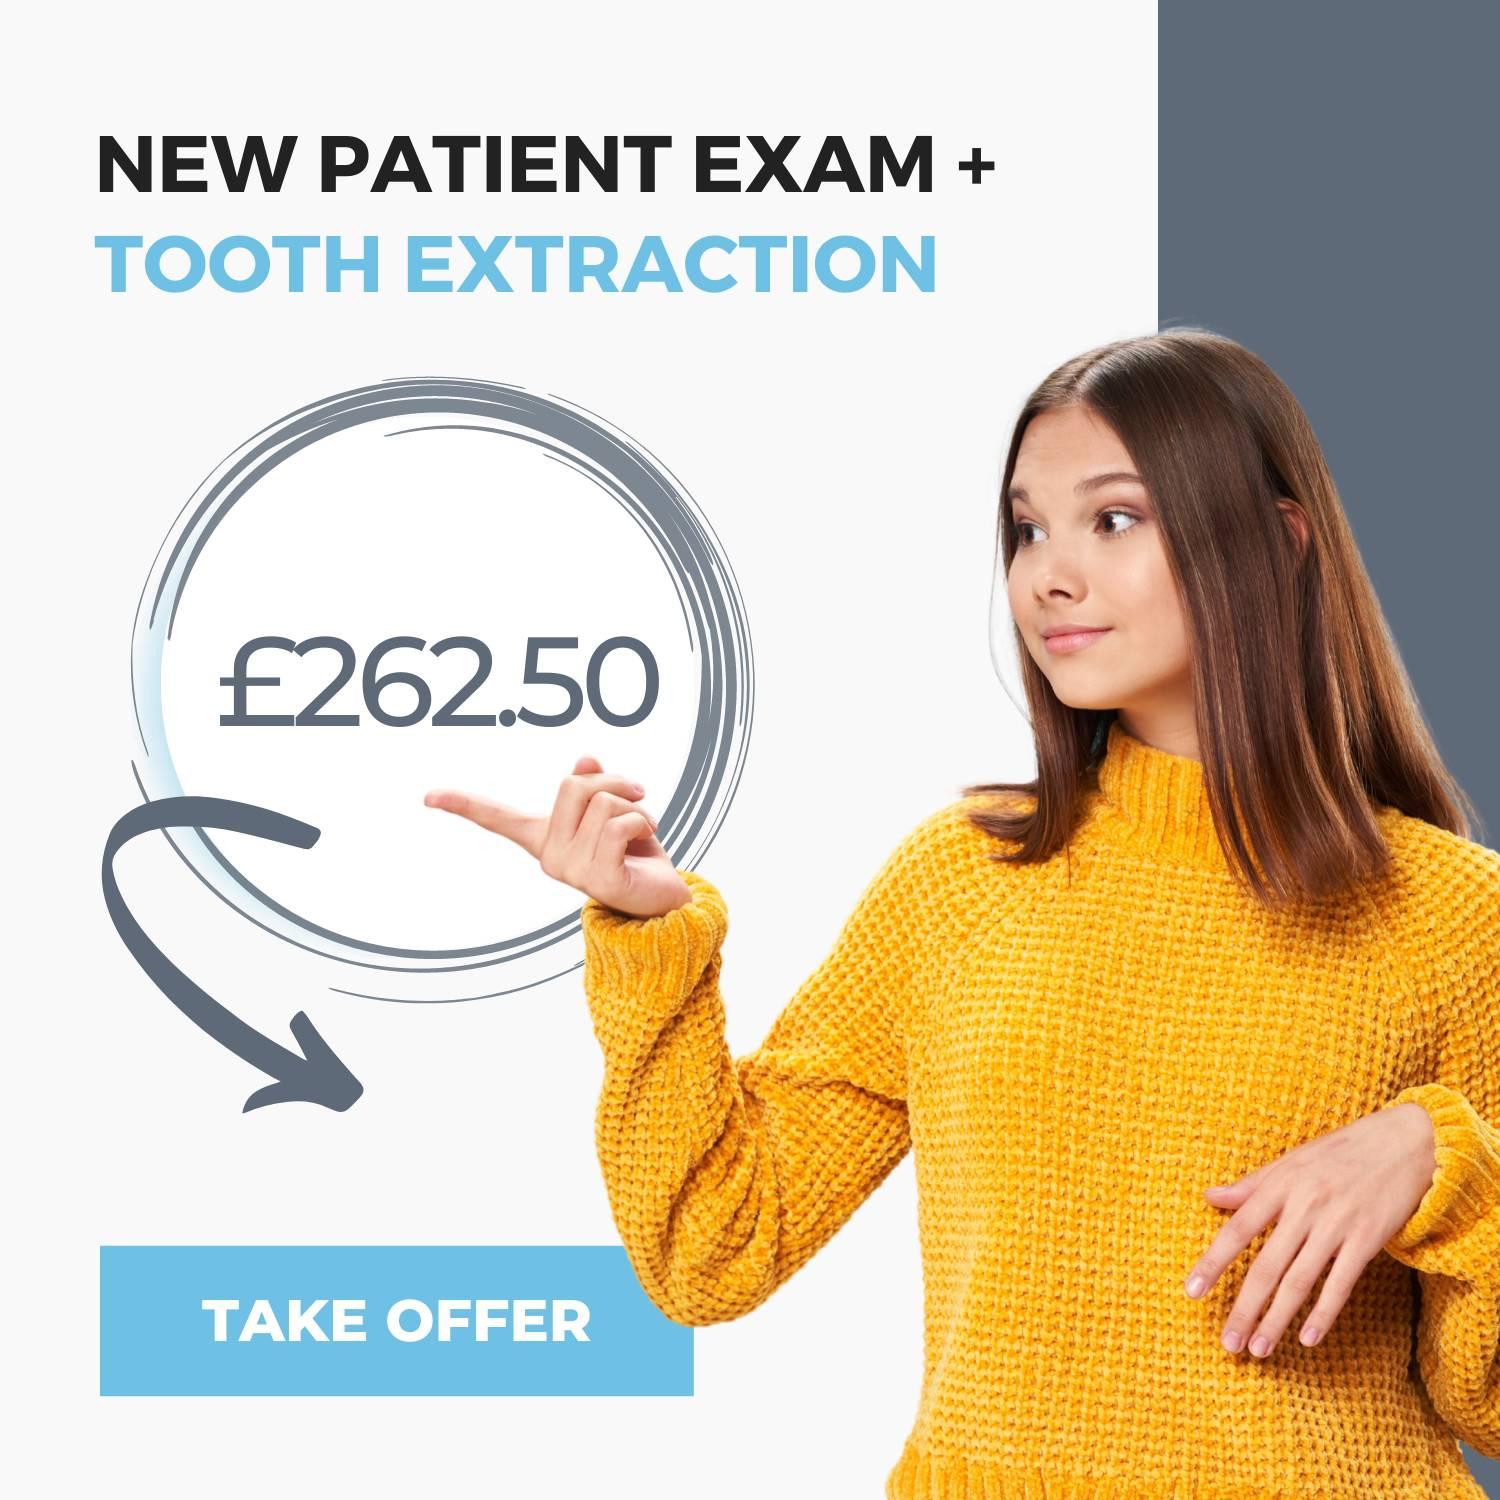 new patient + tooth extraction offer image